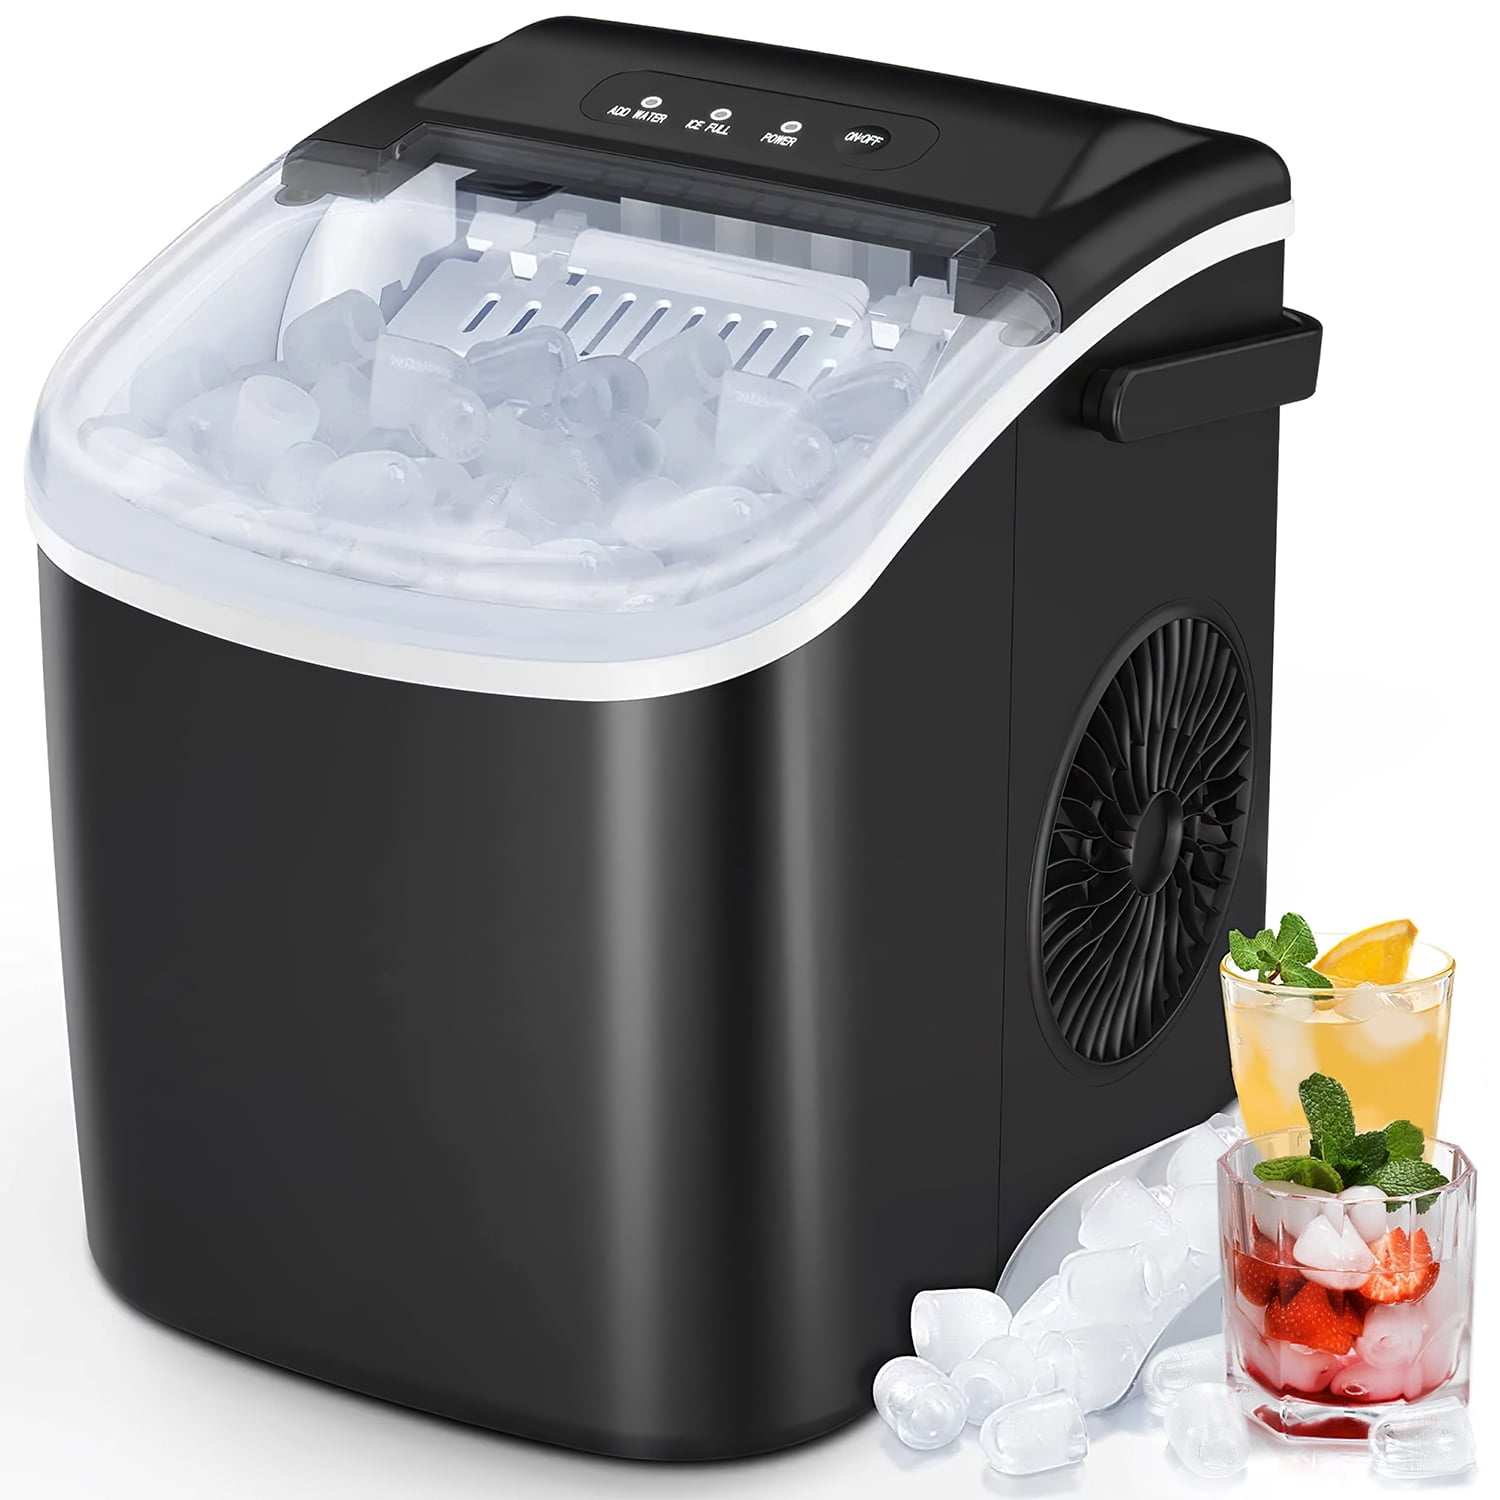 KISSAIR Countertop Ice Maker, Self-Cleaning Portable Ice Maker Machine with Handle, 9 Bullet-Shaped Ice Cubes Ready in 6 Mins, 26Lbs/24H with Ice Scoop and Basket for Home/Kitchen/Party